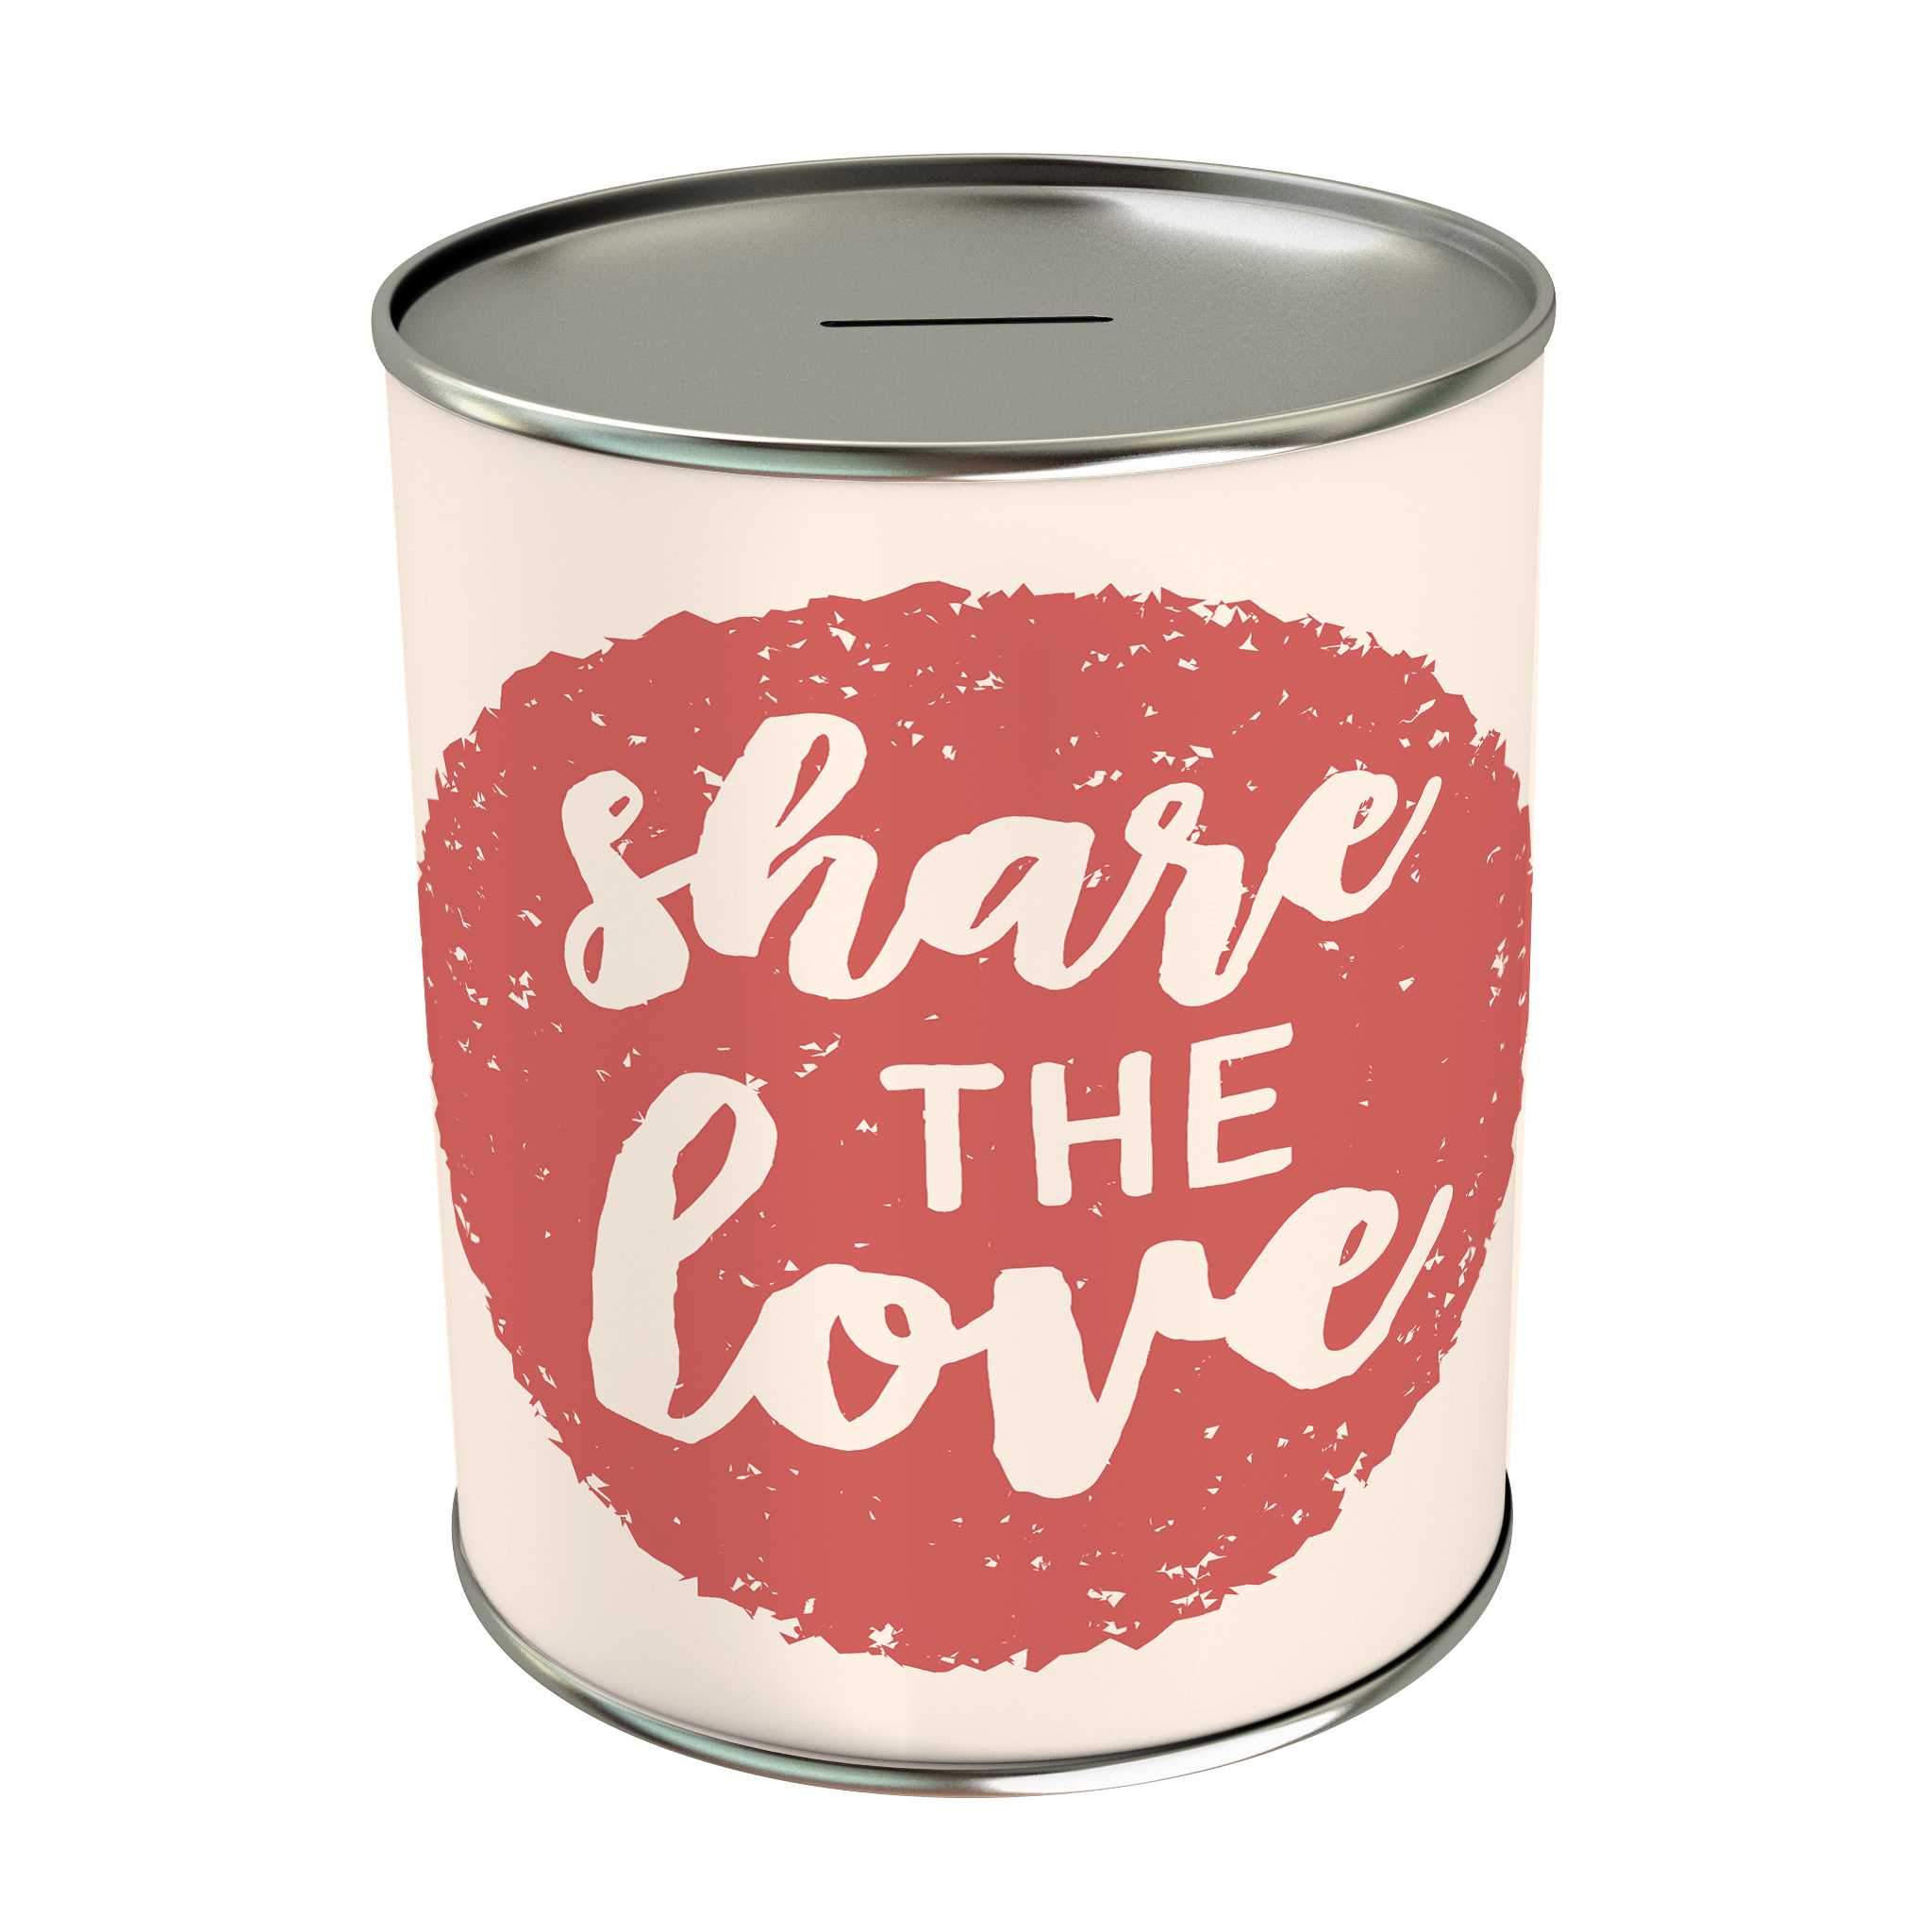 Words of Love Coin Bank: Share the Love